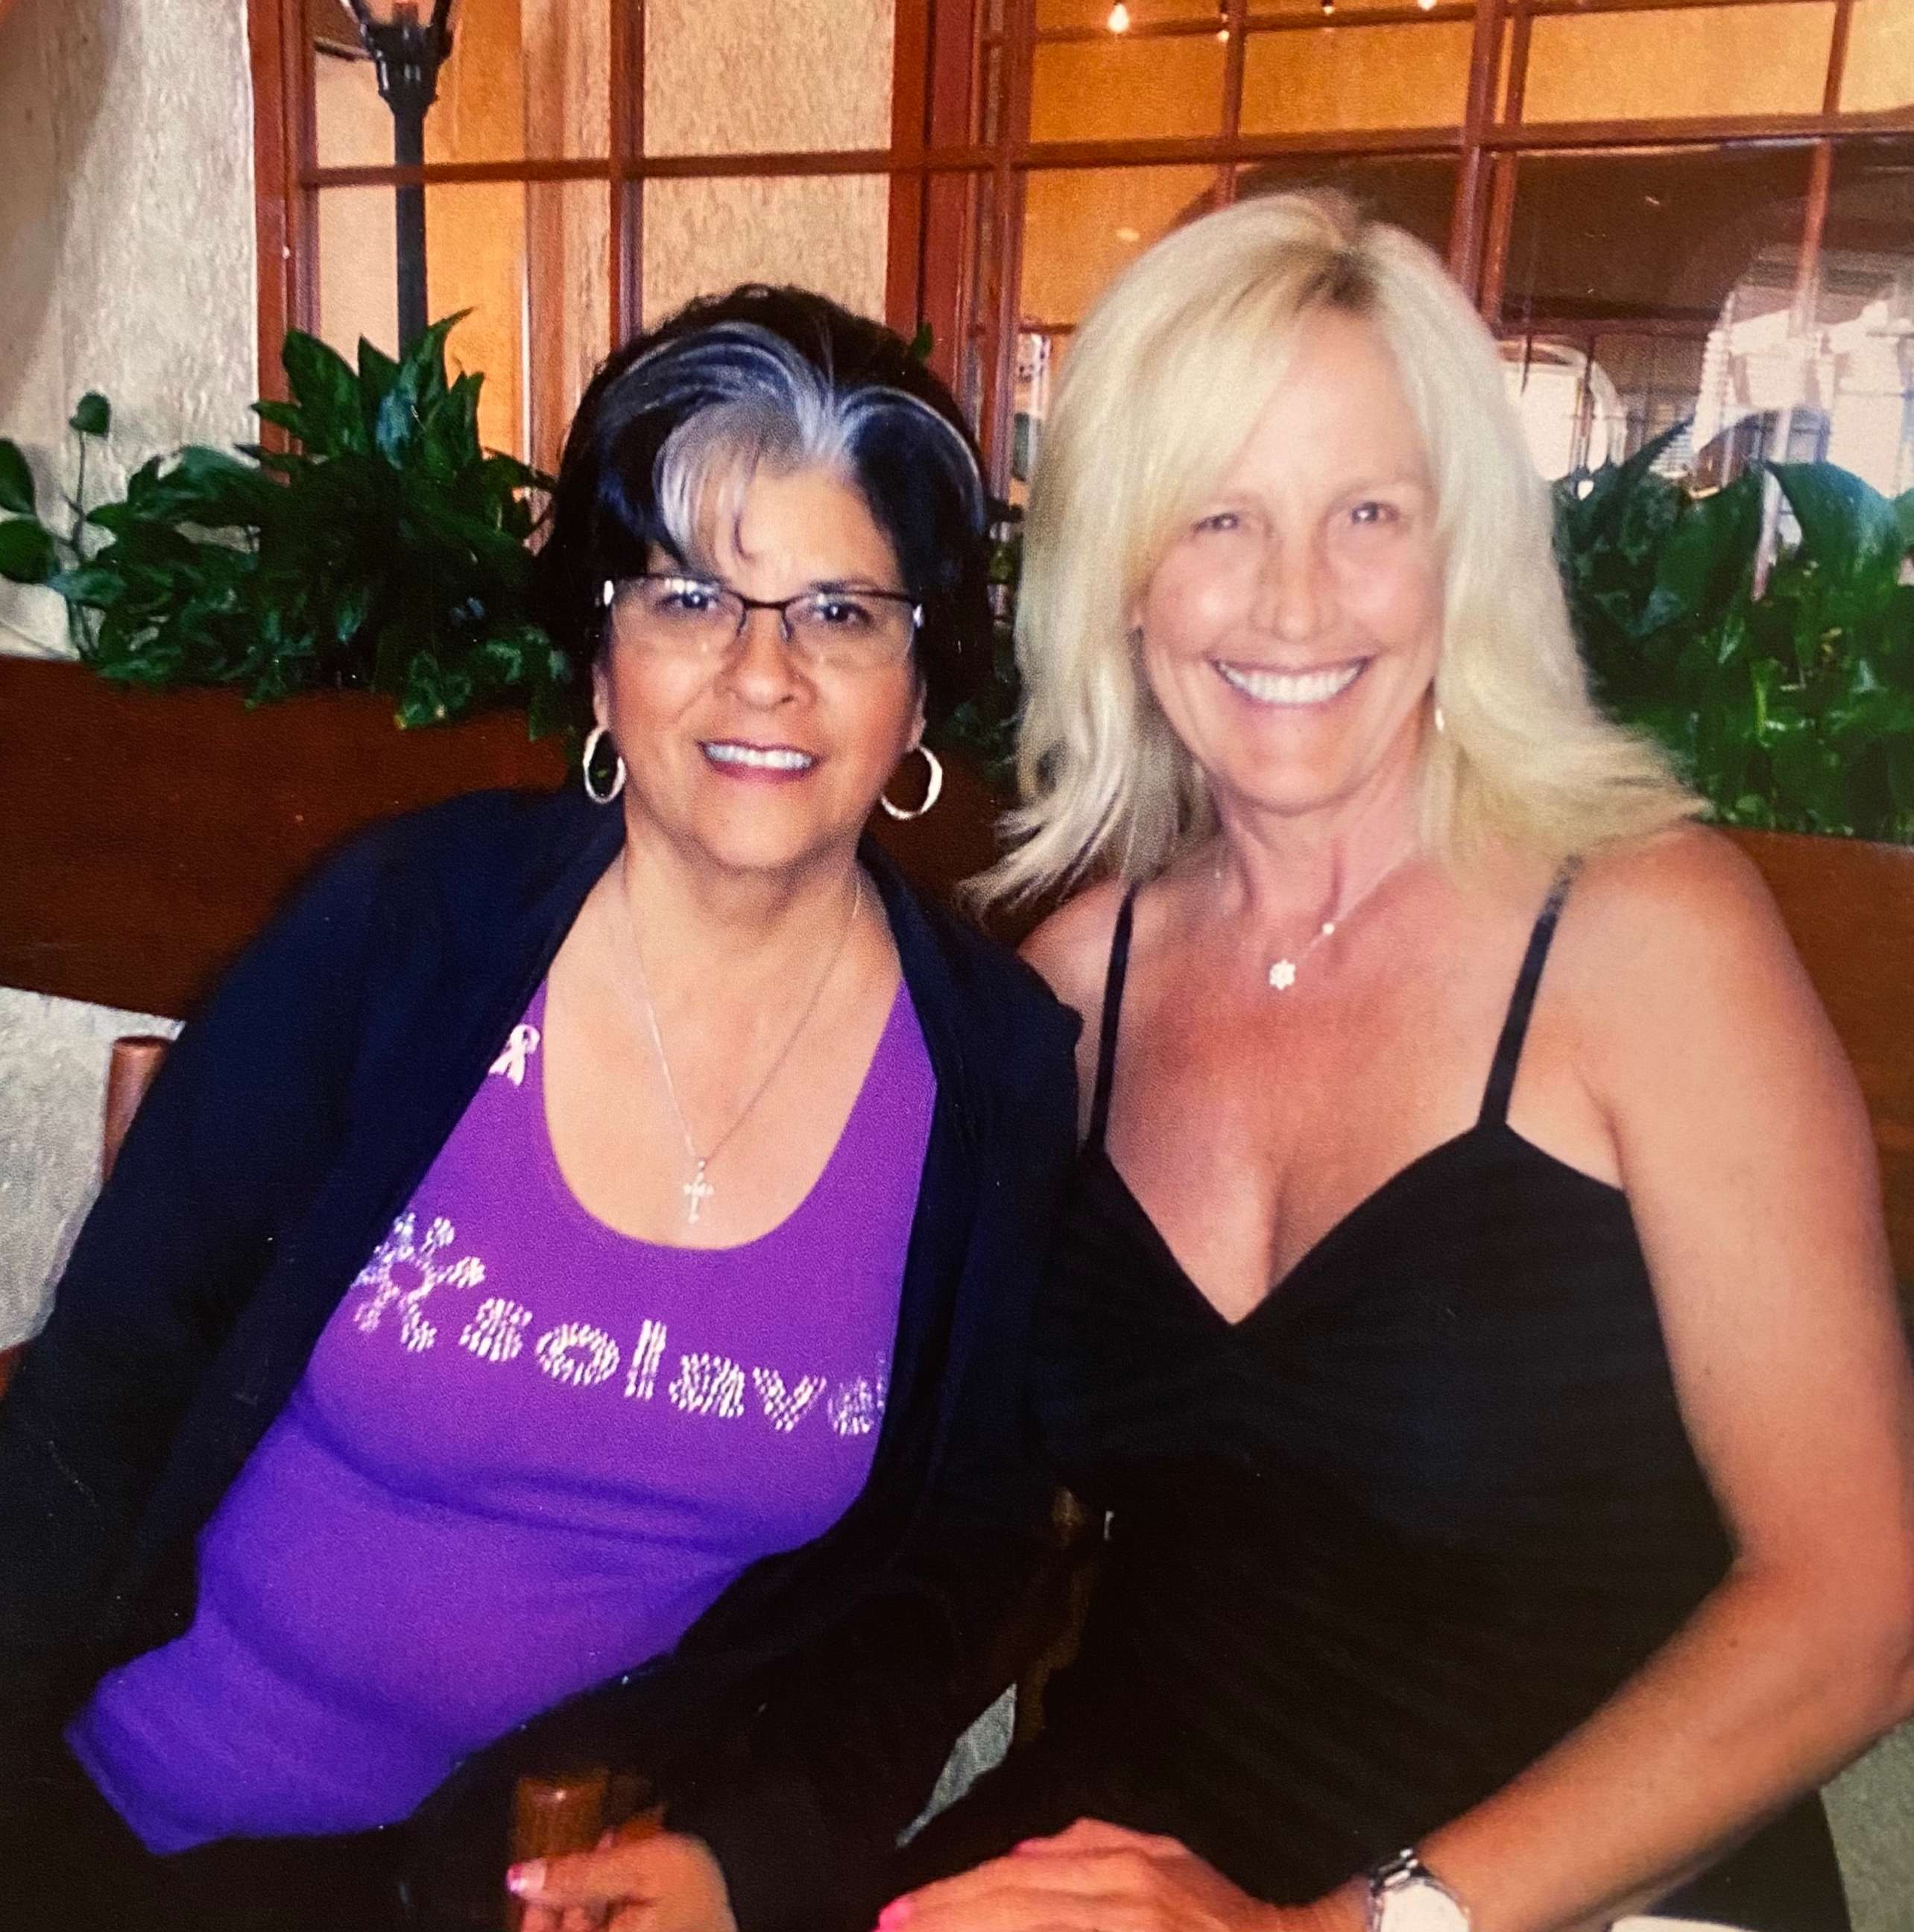 PHOTO: Roberta Walker and Erin Brockovich pictured at an unknown date.